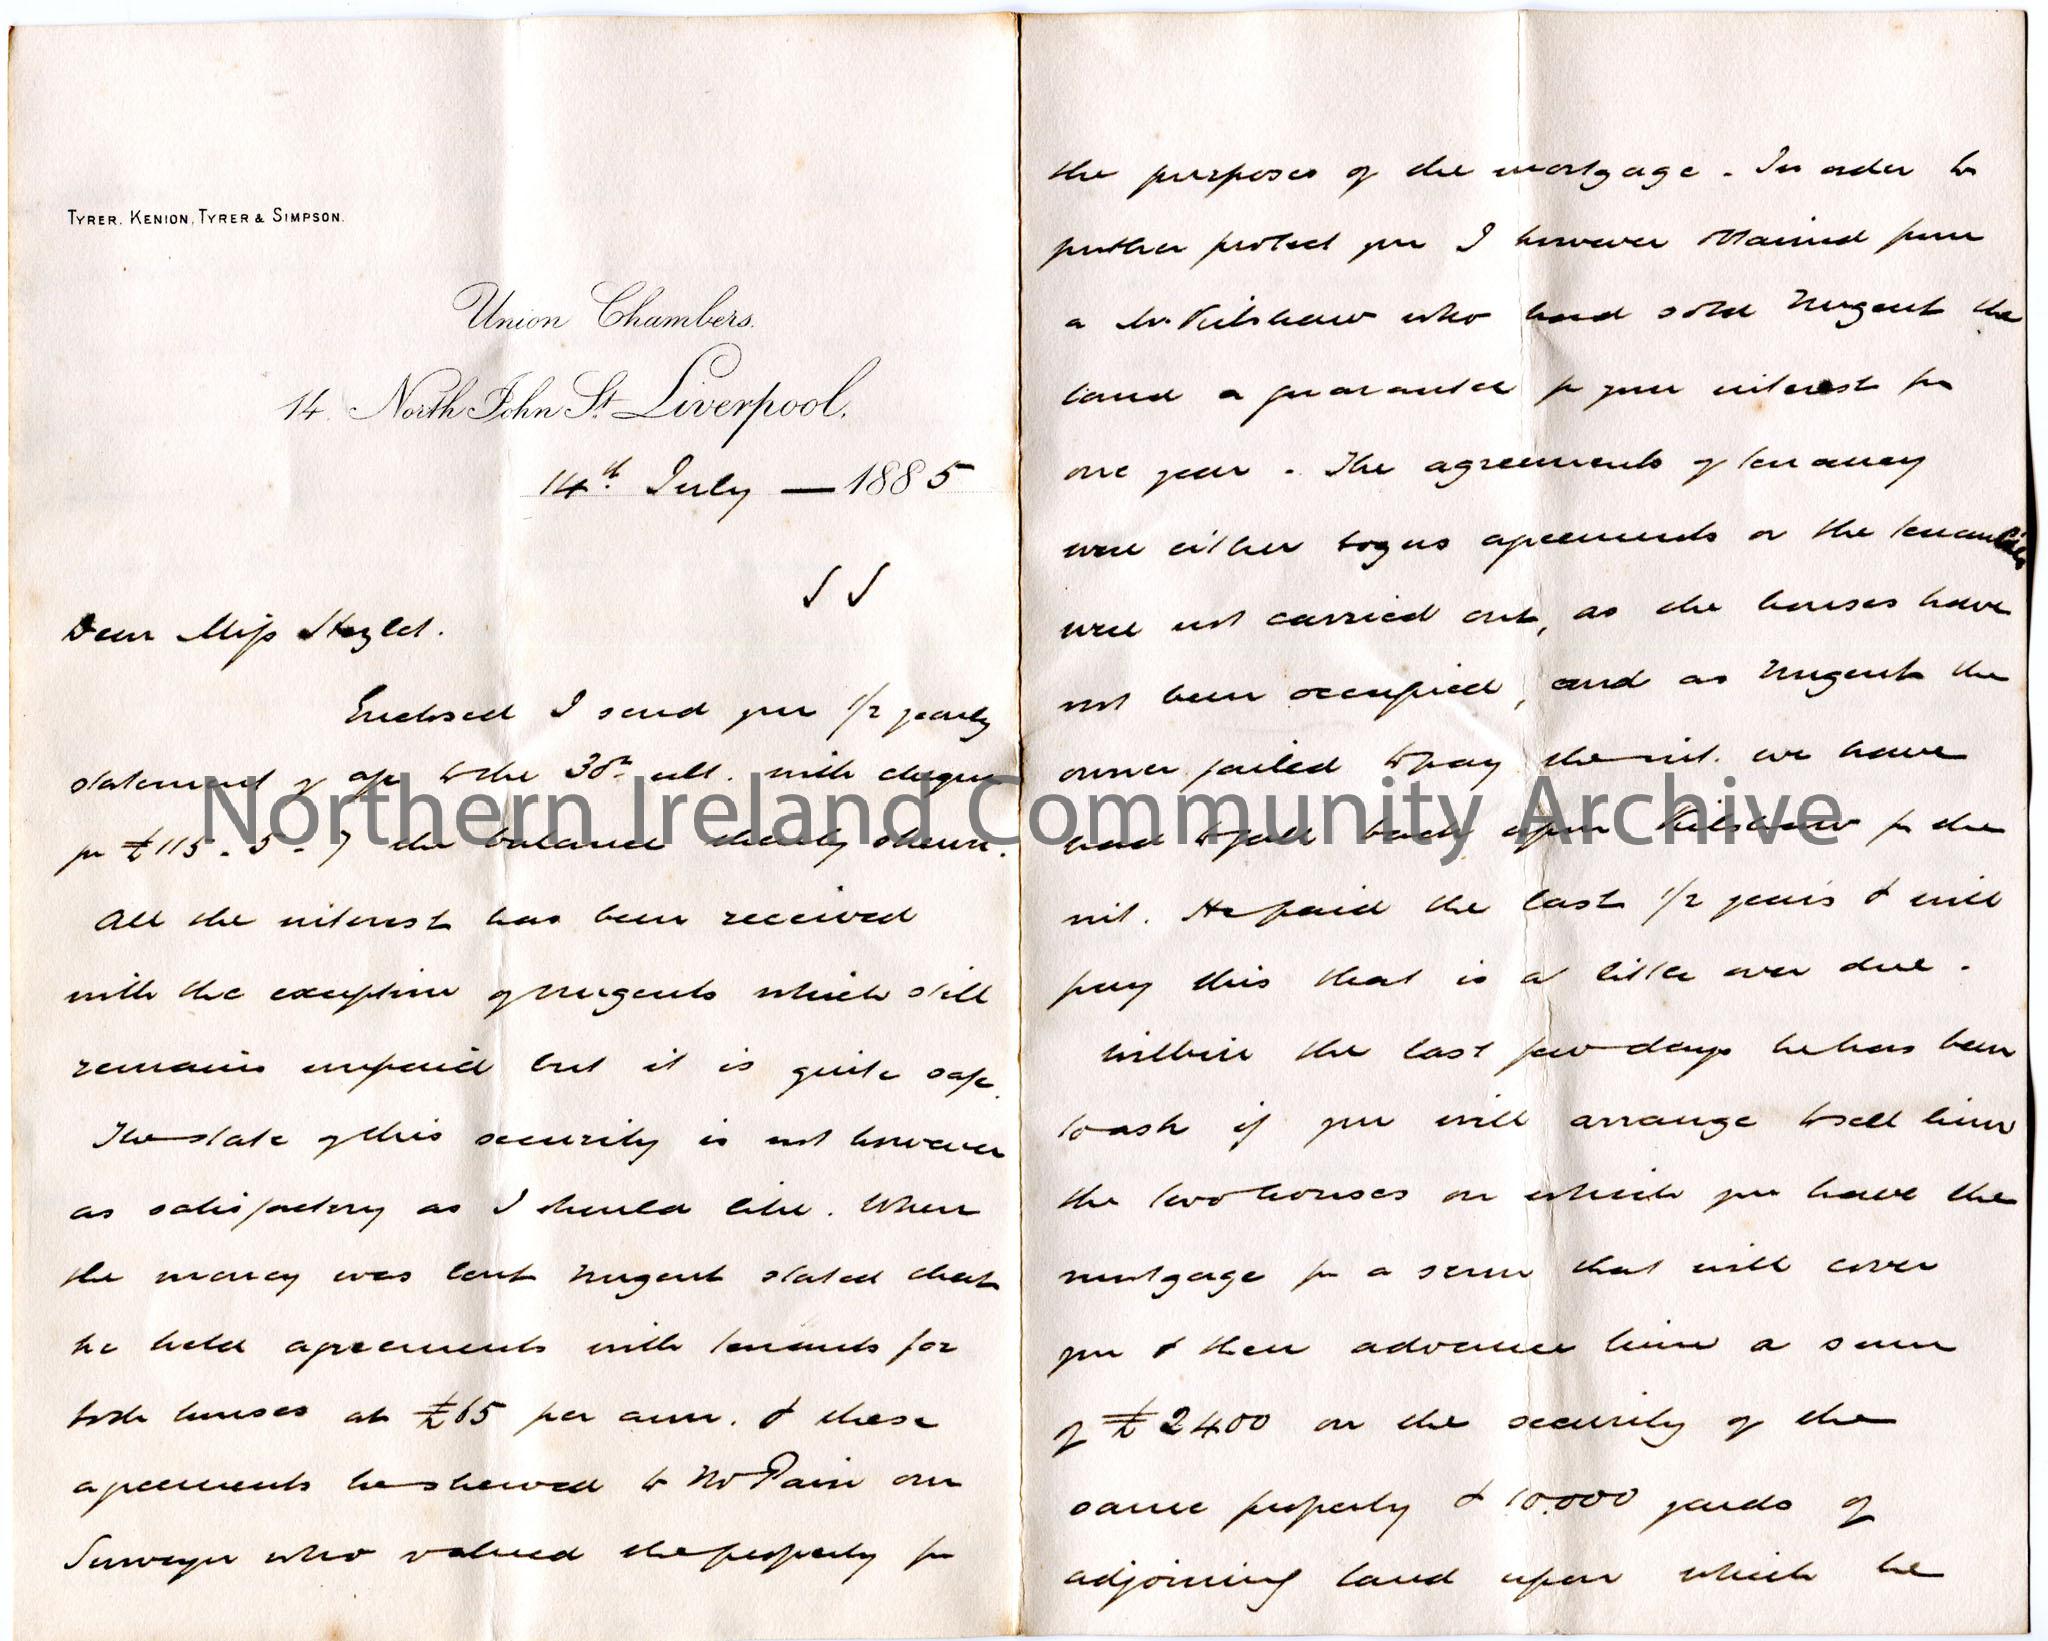 Handwritten letter, double sided, to Miss Hezlet at Bovagh, Aghadowey, Co.Antrim. Encloses half yearly statement of accounts and cheque for £115….